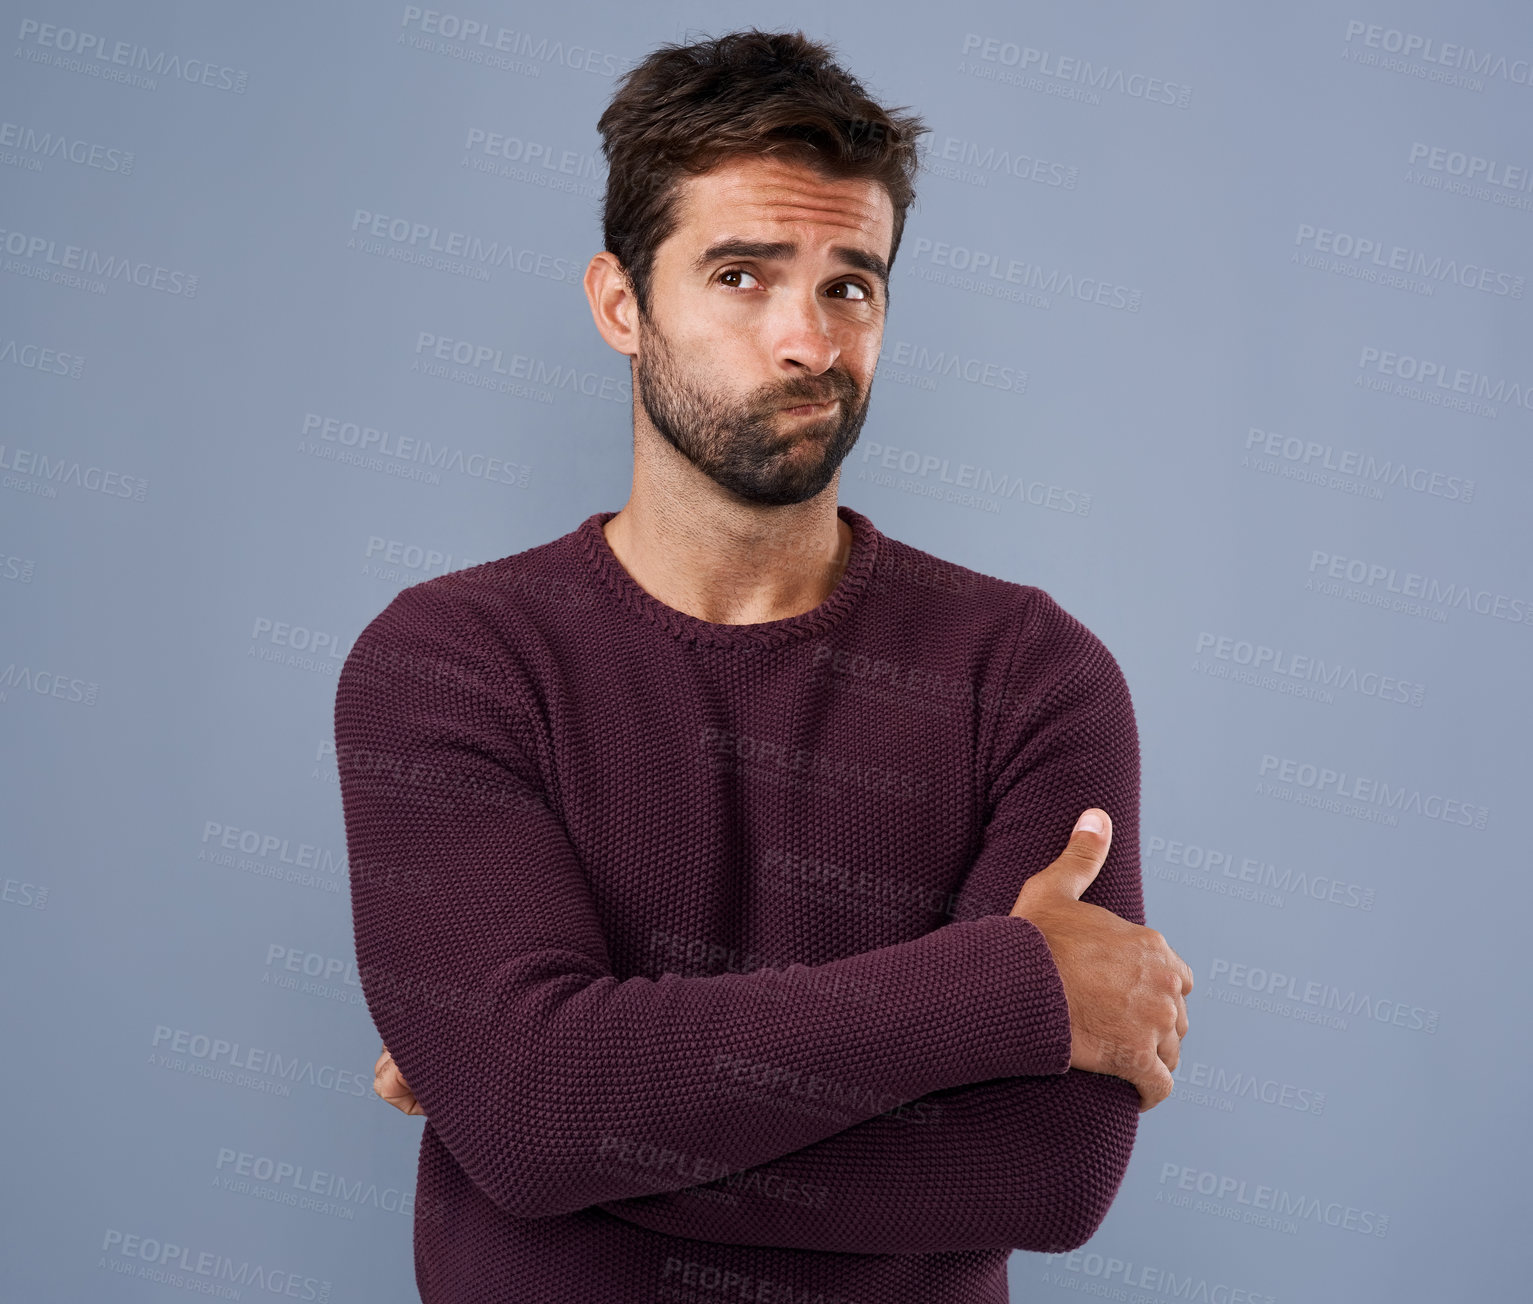 Buy stock photo Studio shot of a handsome young man looking thoughtful against a gray background